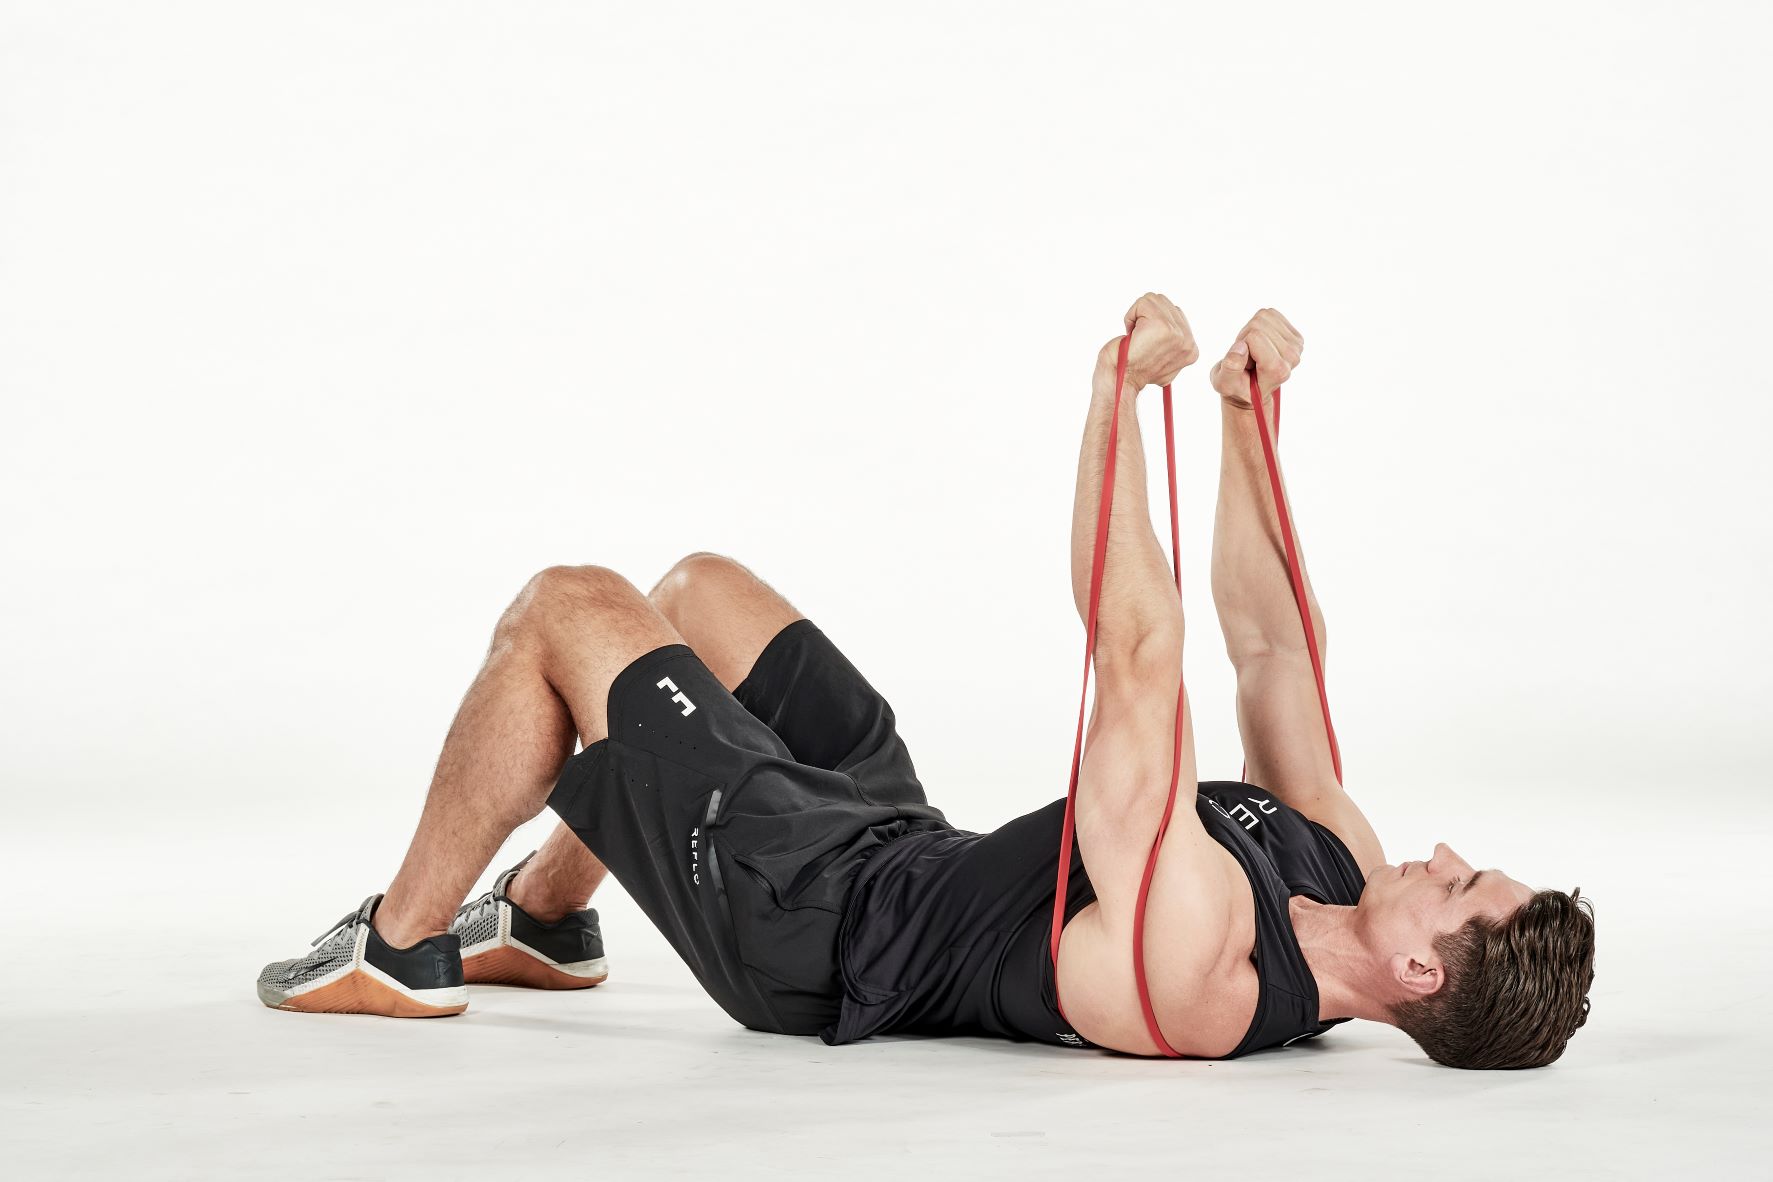 man demonstrating step two of lying chest press; laying on his back with bent knees, the resistance band is passed under his back; holding one end of the resistance band in each hand, he extends his arms up towards the ceiling; he wears a black fitness vest, black shorts and trainers